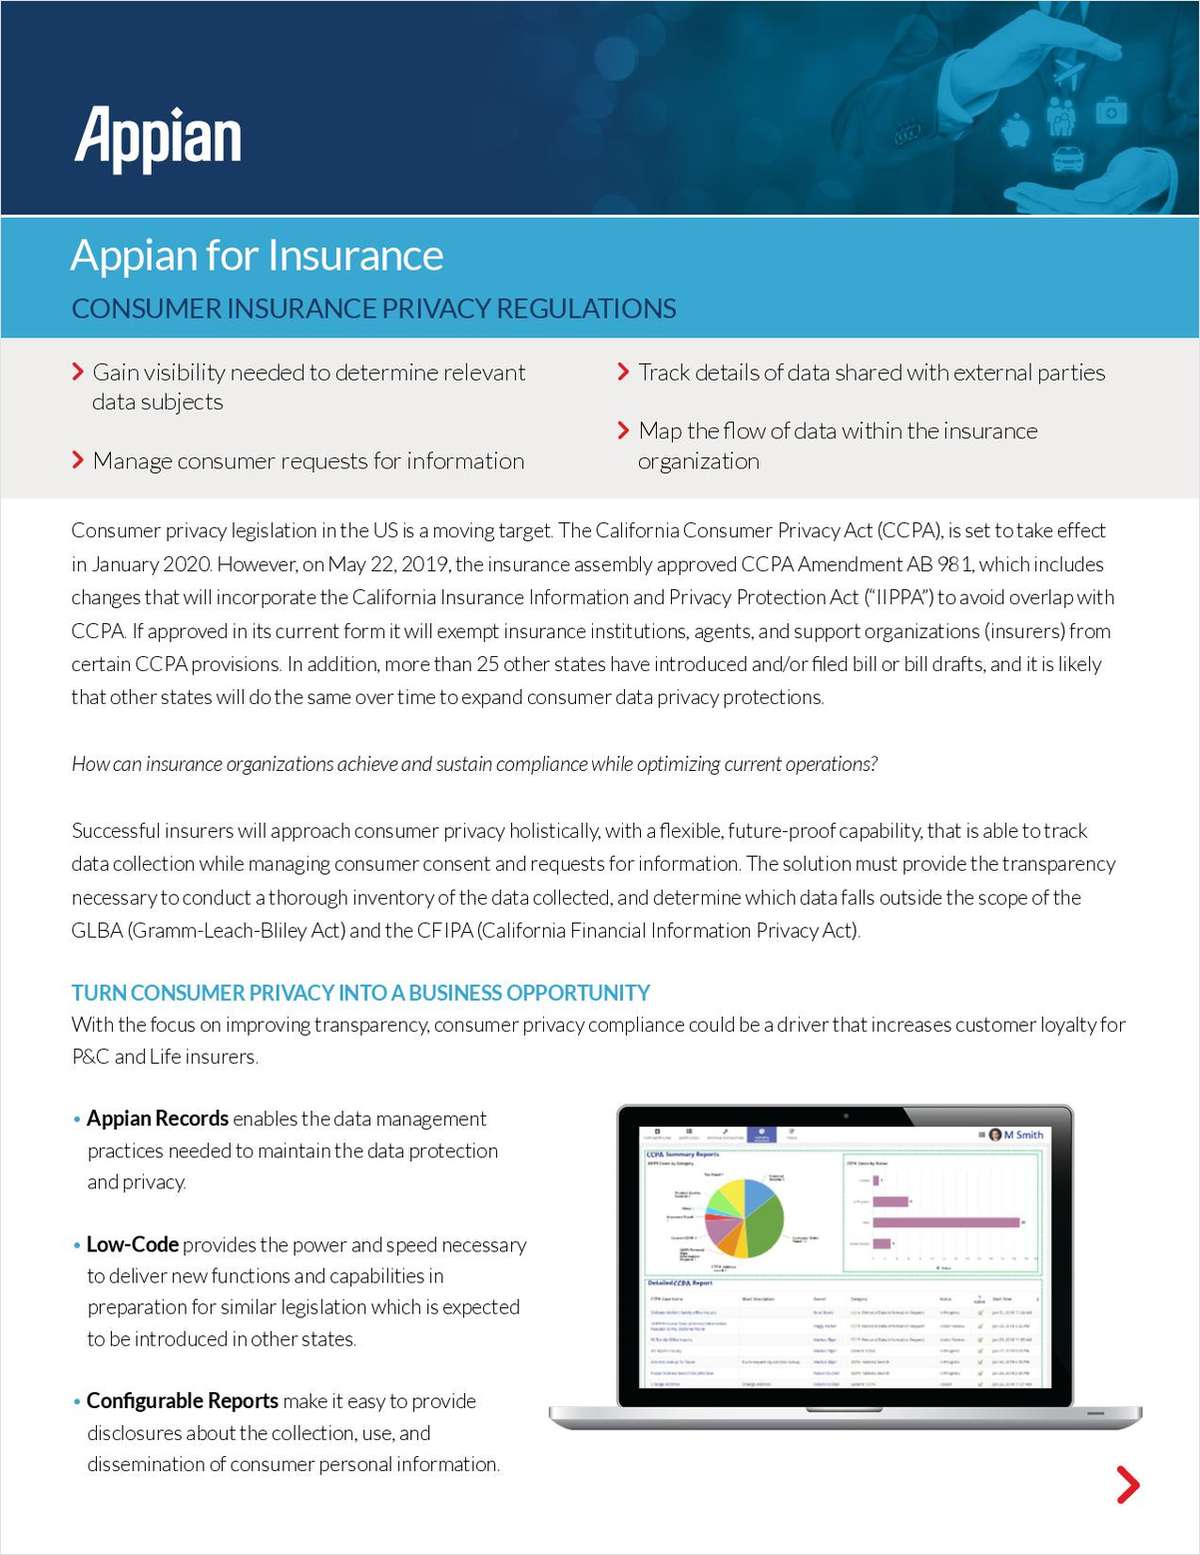 Appian for Insurance: Consumer Insurance Privacy